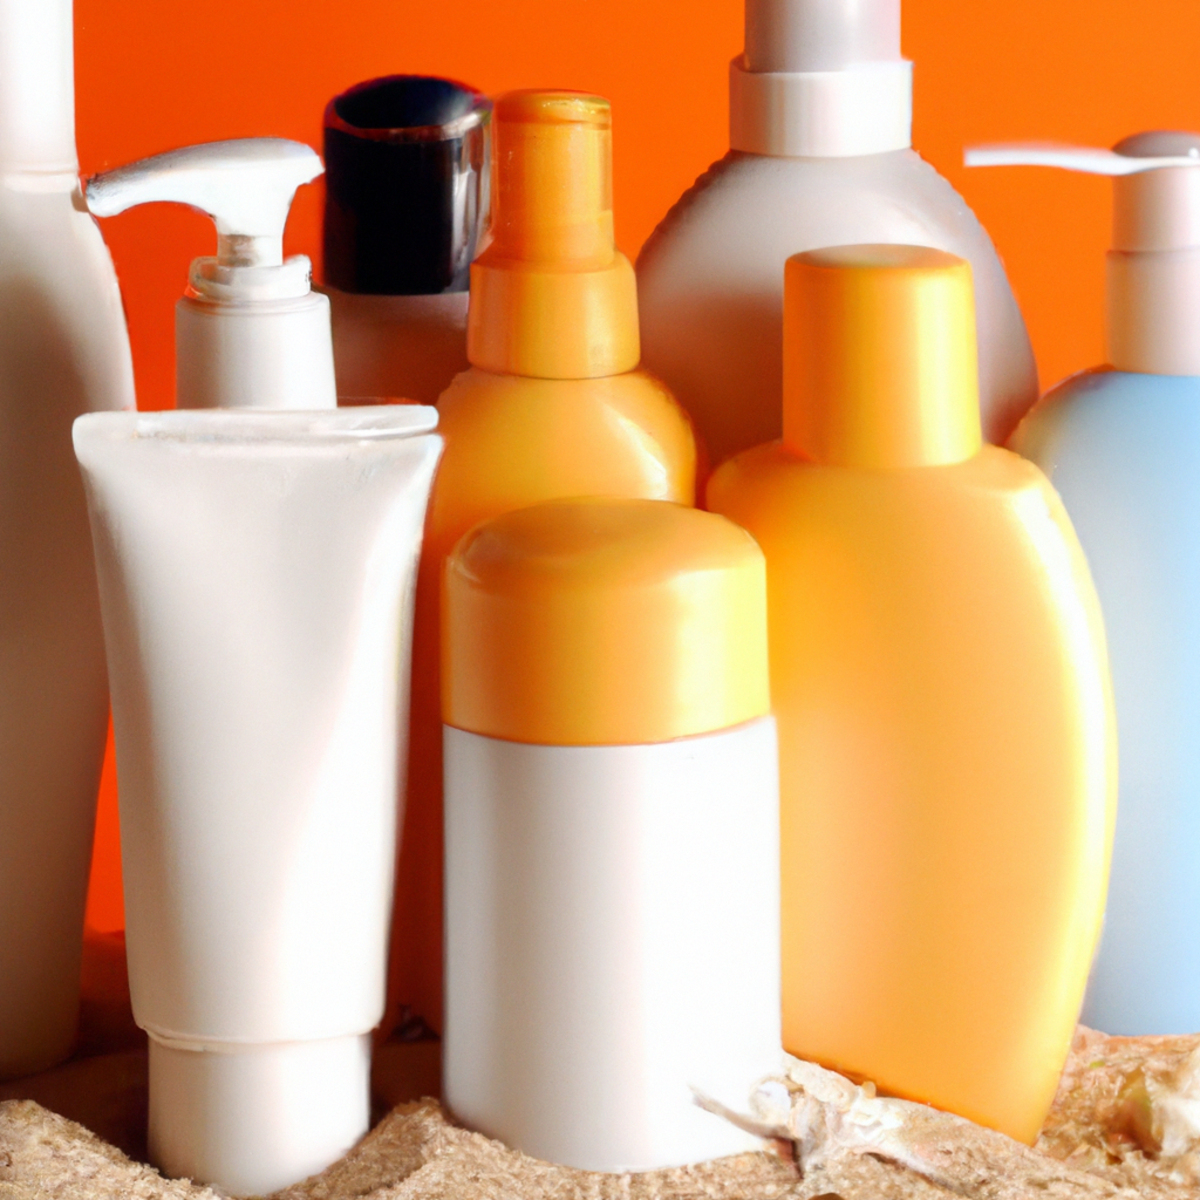 Sunscreen bottles of various SPF levels for sensitive skin, emphasizing the importance of sun protection for rosacea management.